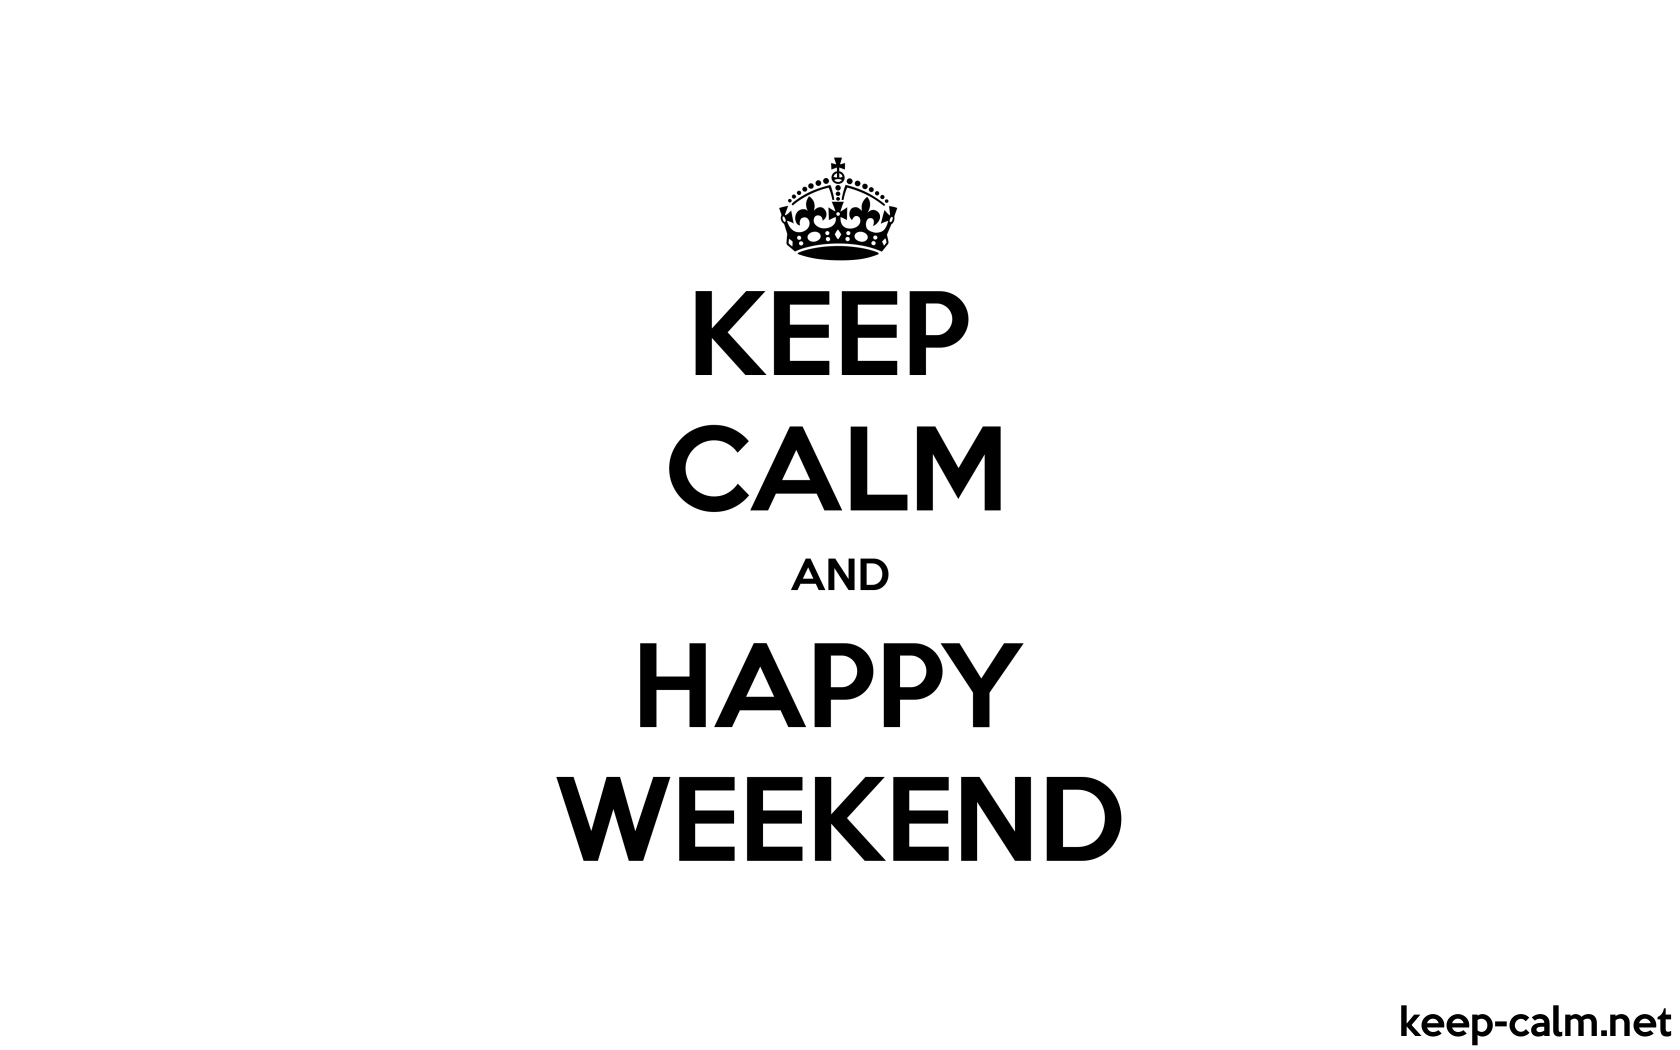 KEEP CALM AND HAPPY WEEKEND